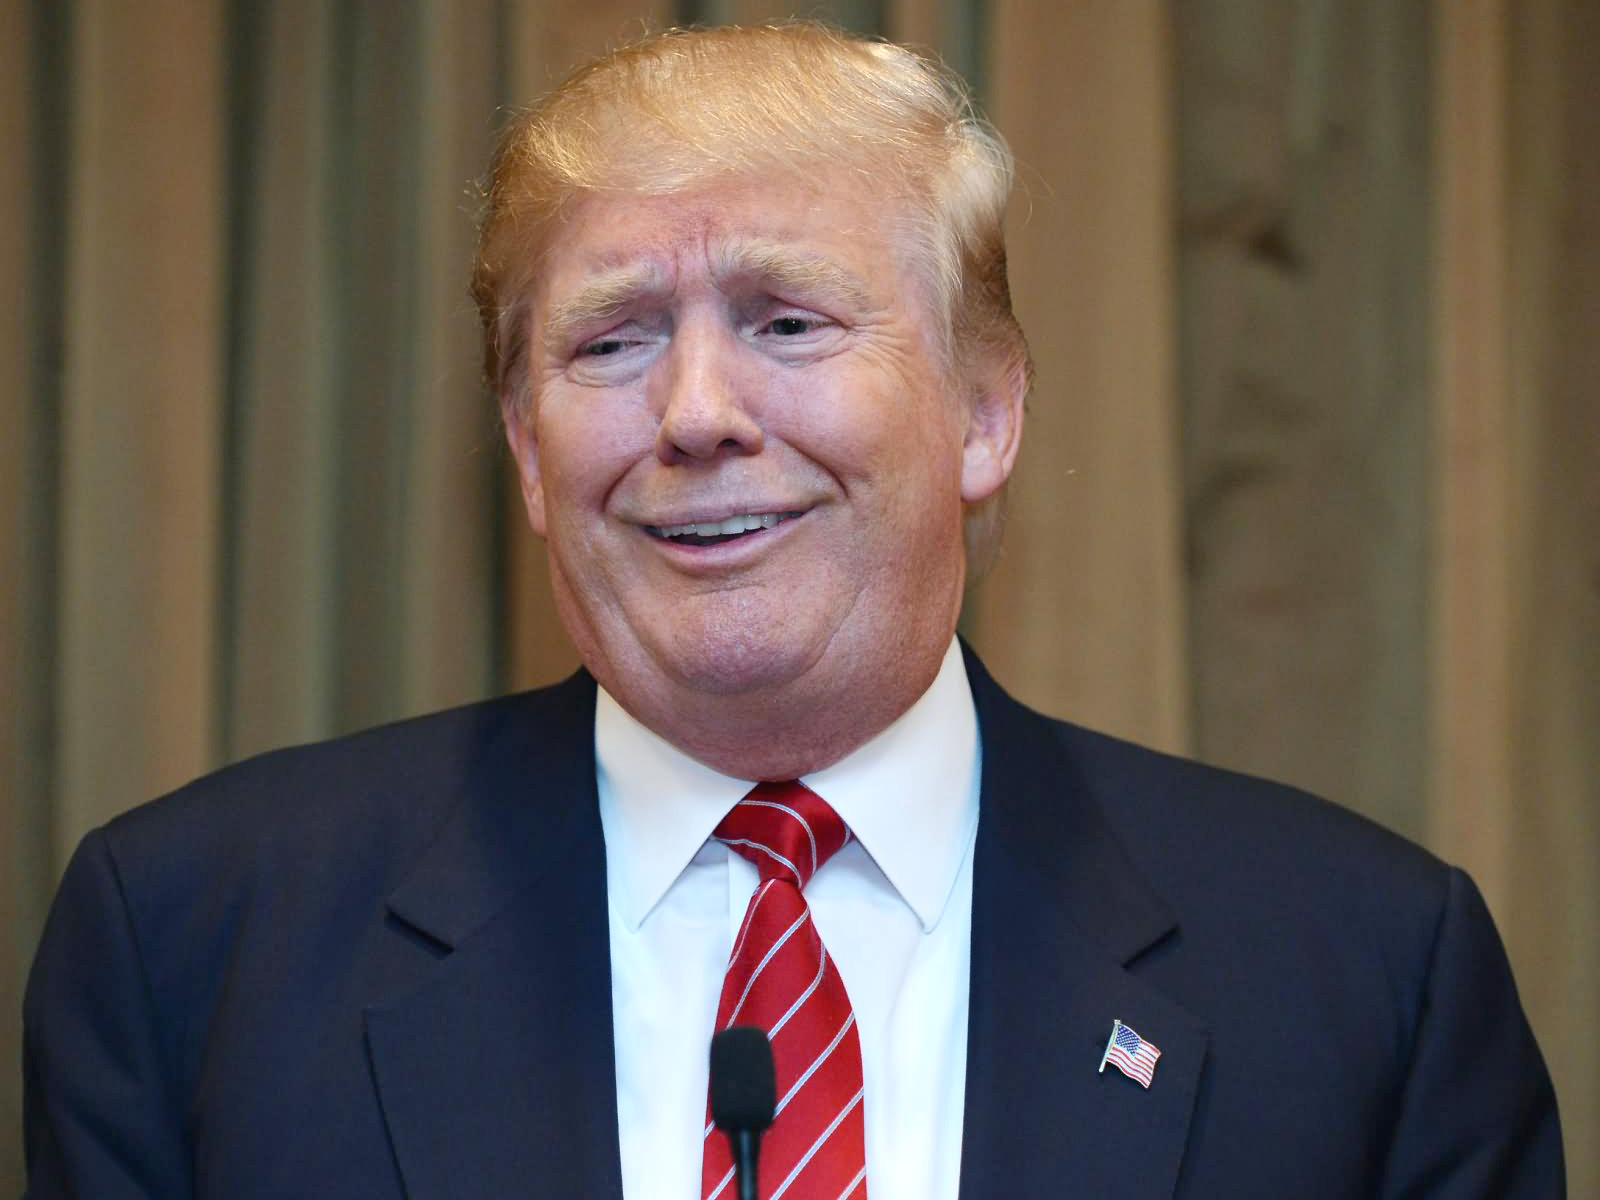 001-Donald-Trump-Funny-Smiling-Picture